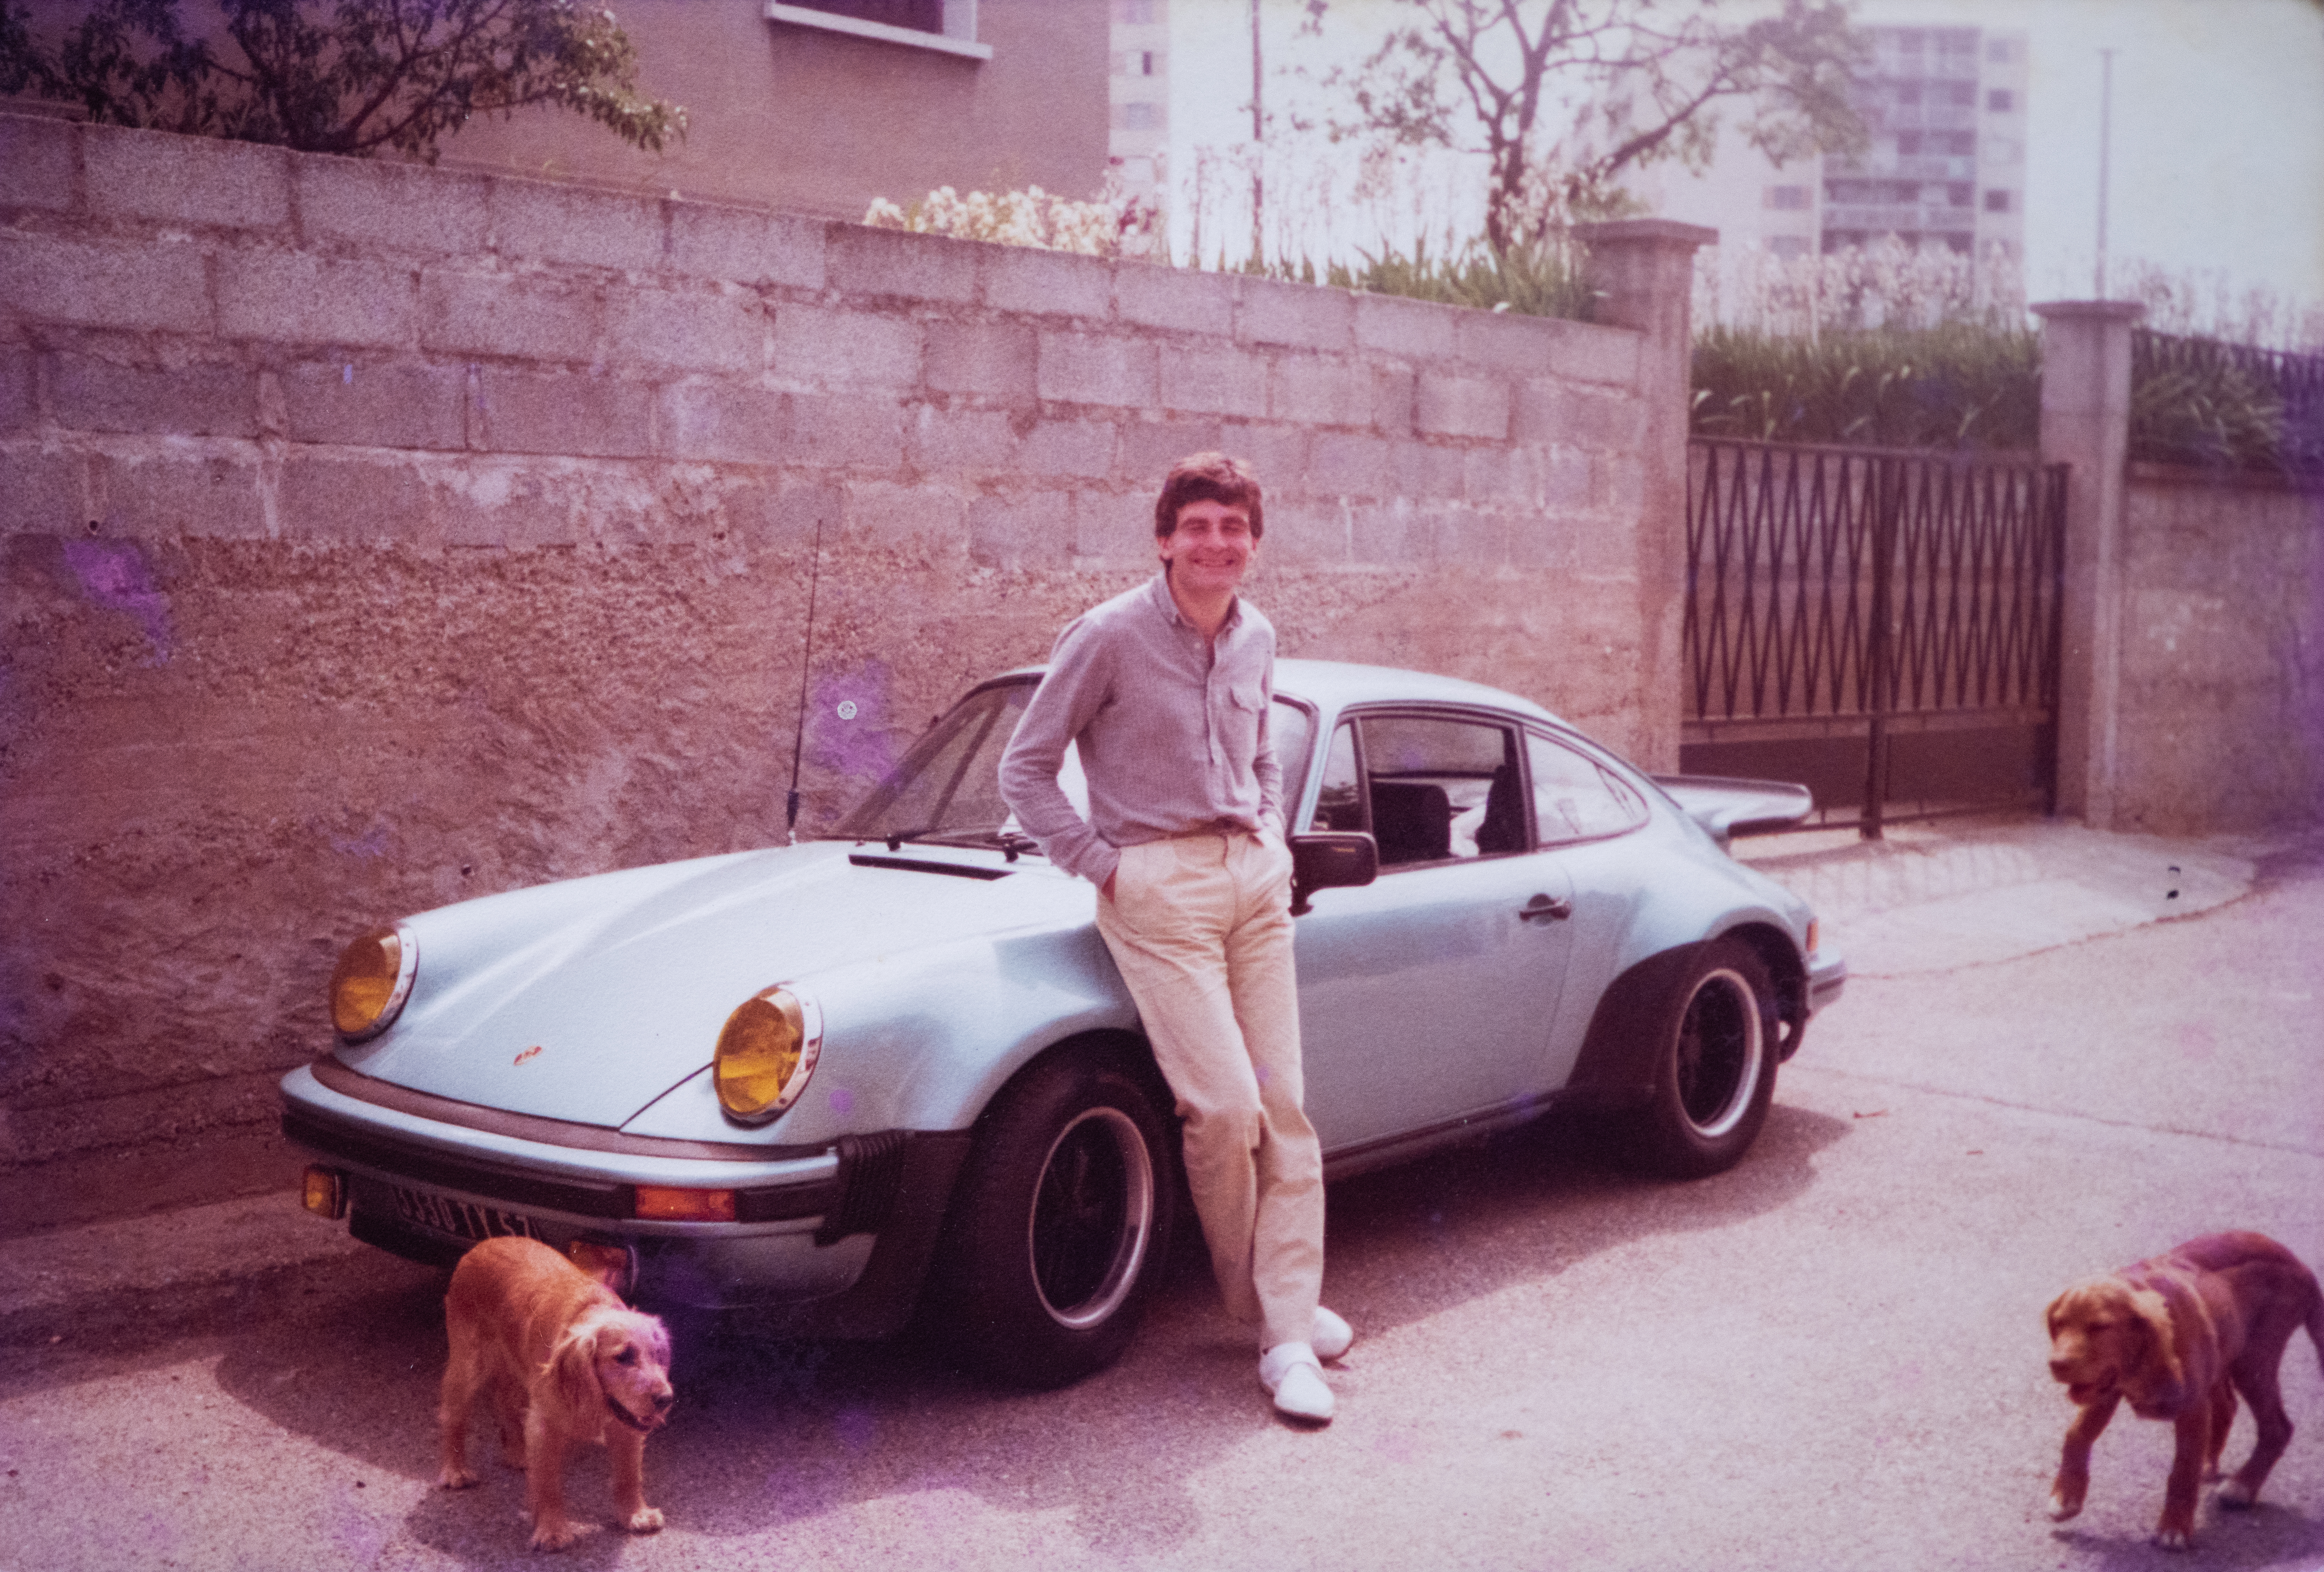 Old photo of man leaning against a blue Porsche. Dogs in foreground